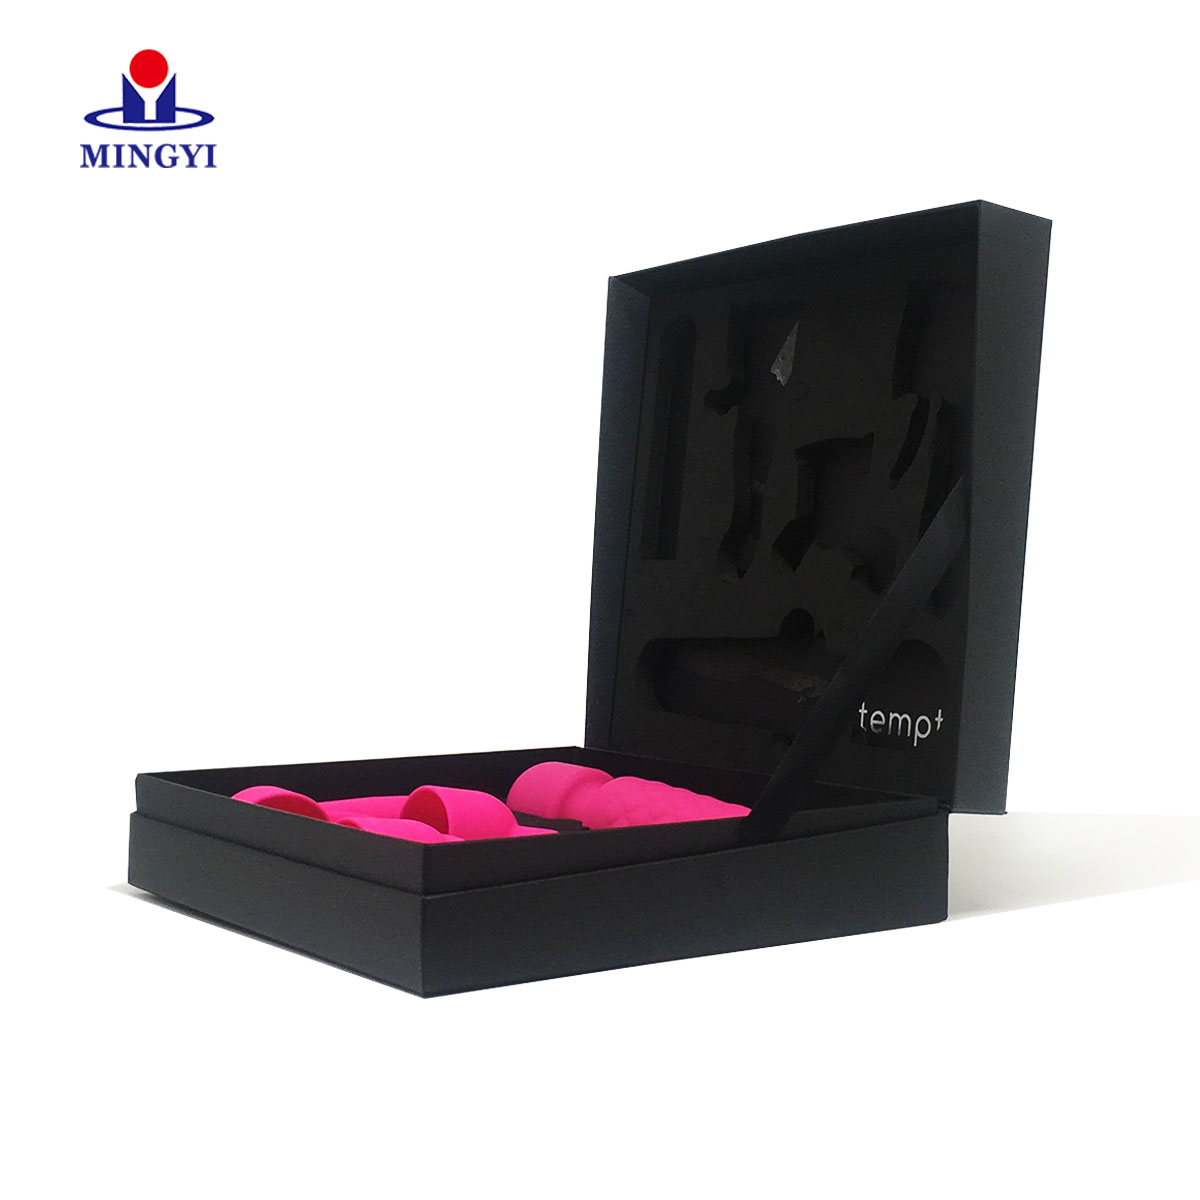 Customized sex toy cardboard packaging box with calmshell structure